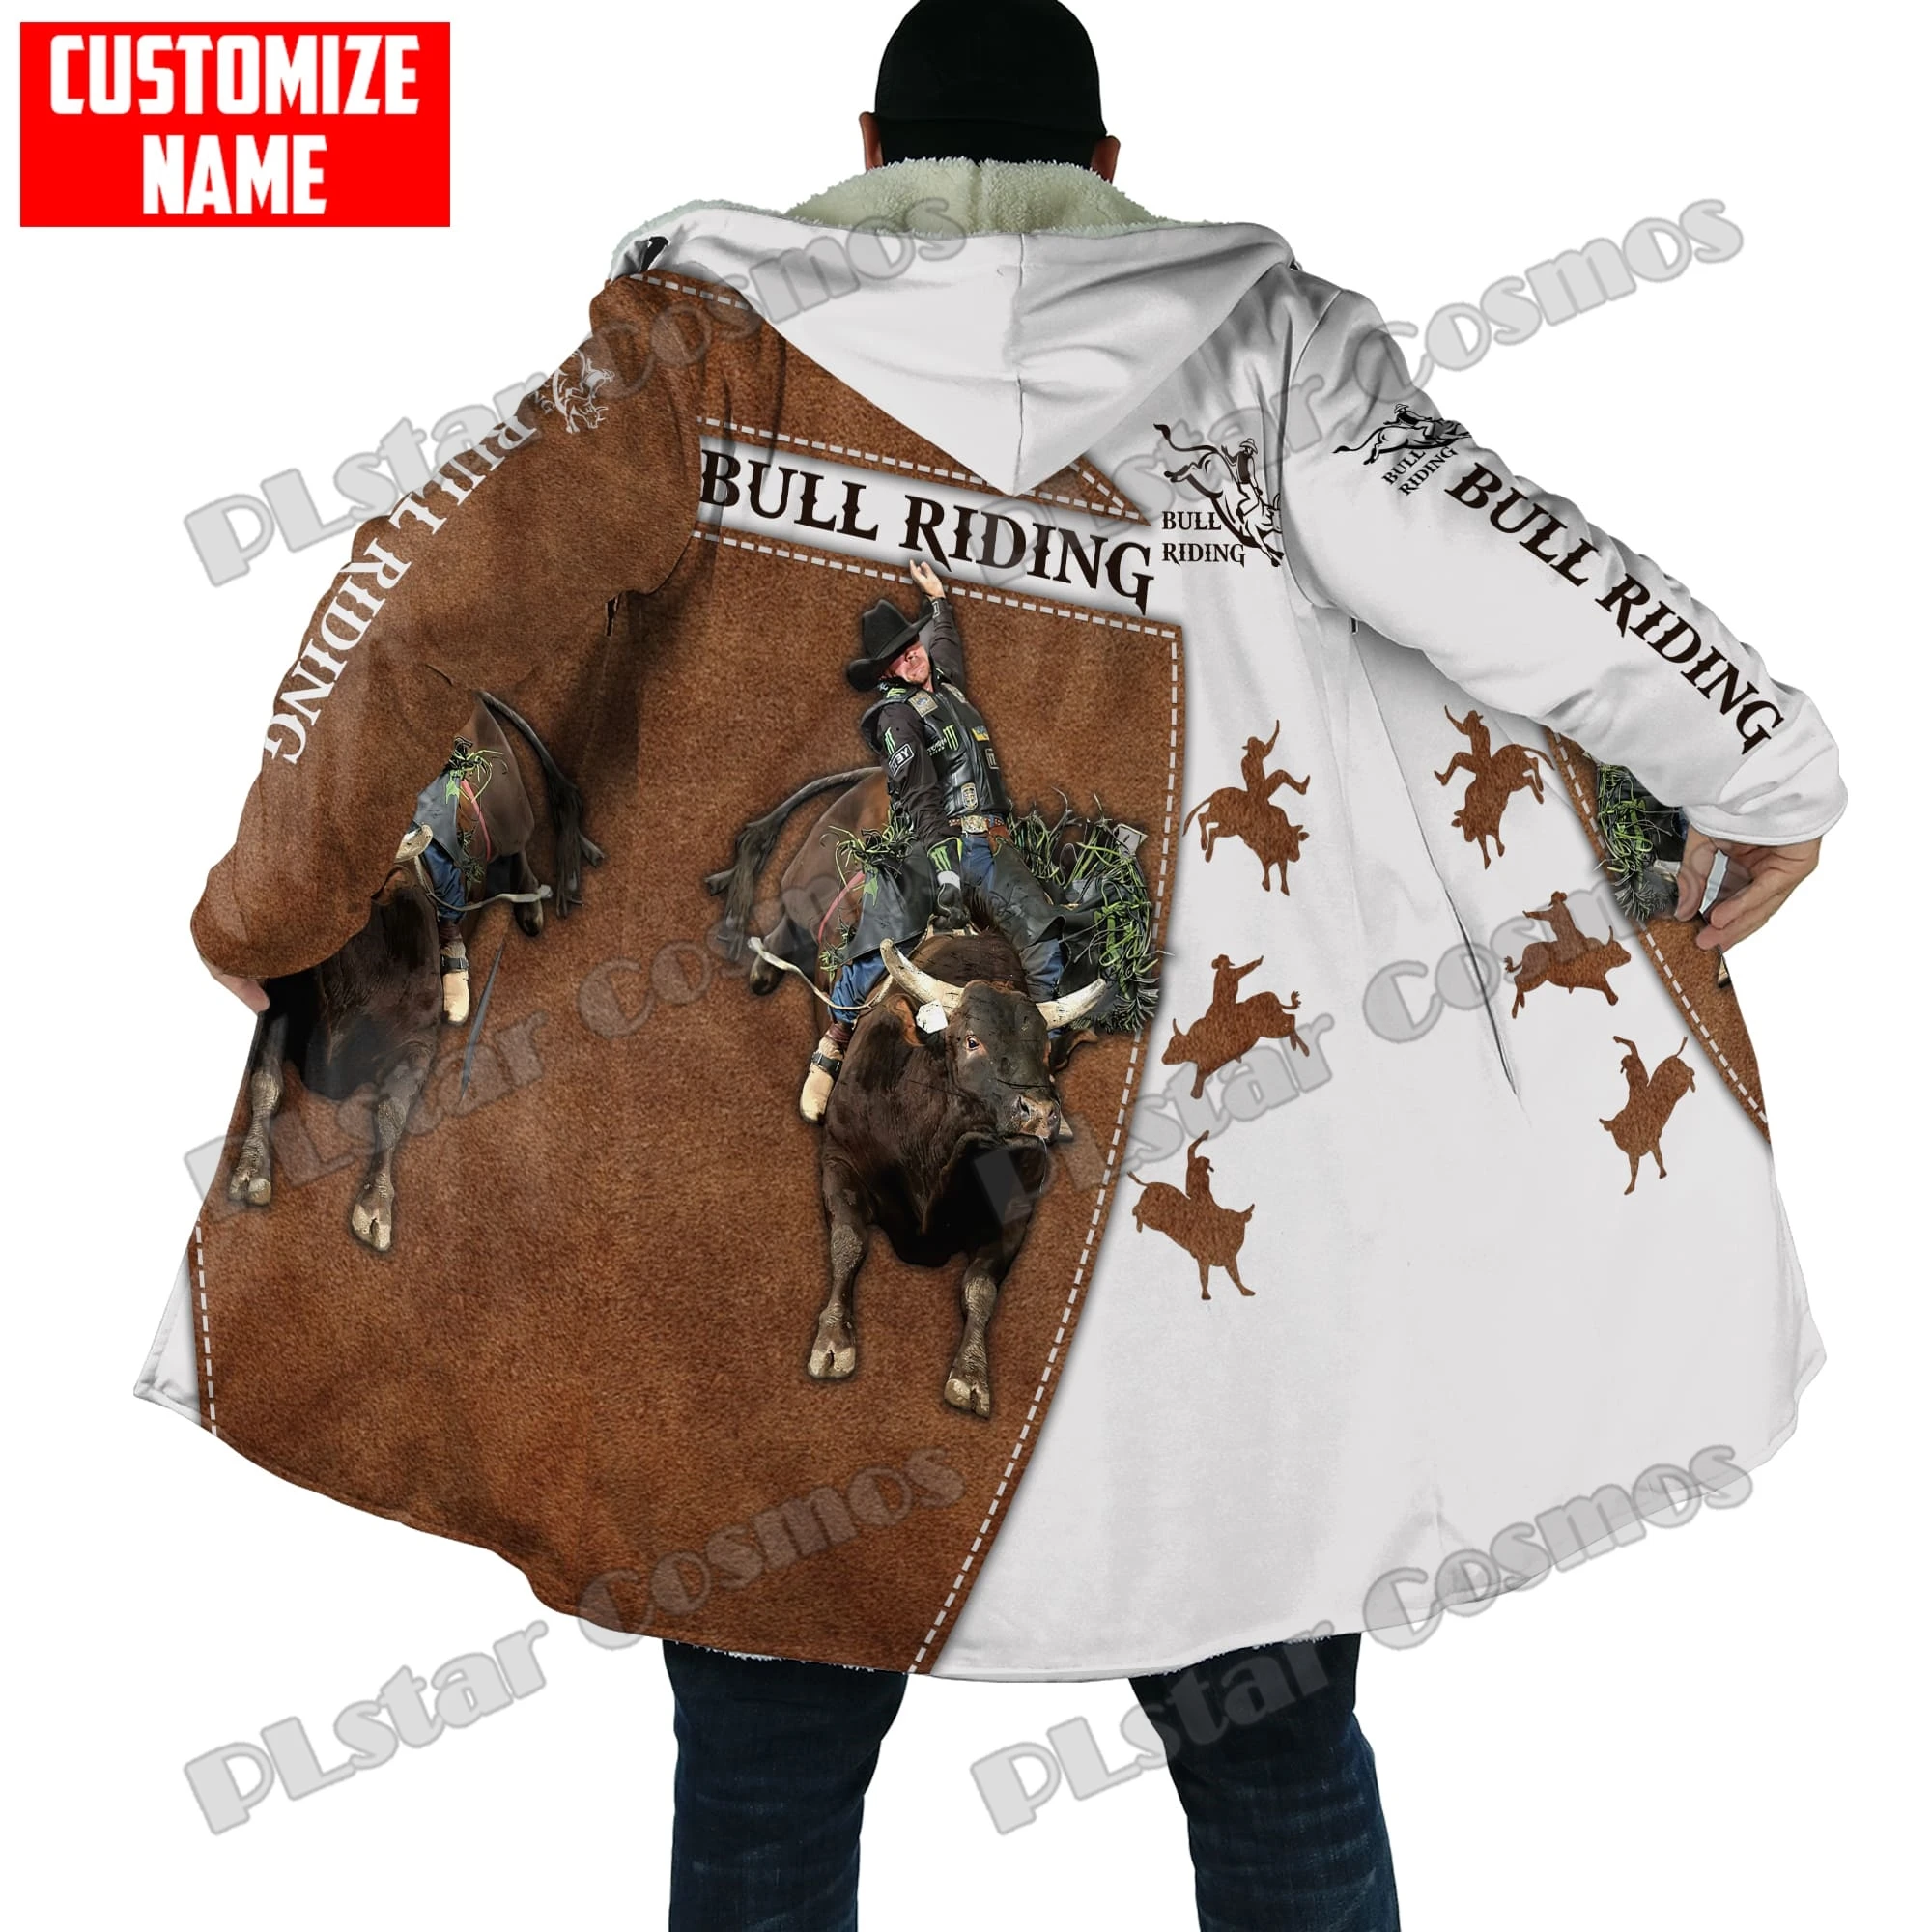 Winter Fashion Mens Cloak Personalized Name Bull Riding 3D Printed Fleece Hooded cloak Unisex Casual Thick Warm Cape coat PJ08 gasgas motorcycle bandana neck gaiter printed racing mountain bike face scarf multifunctional face mask riding unisex adult